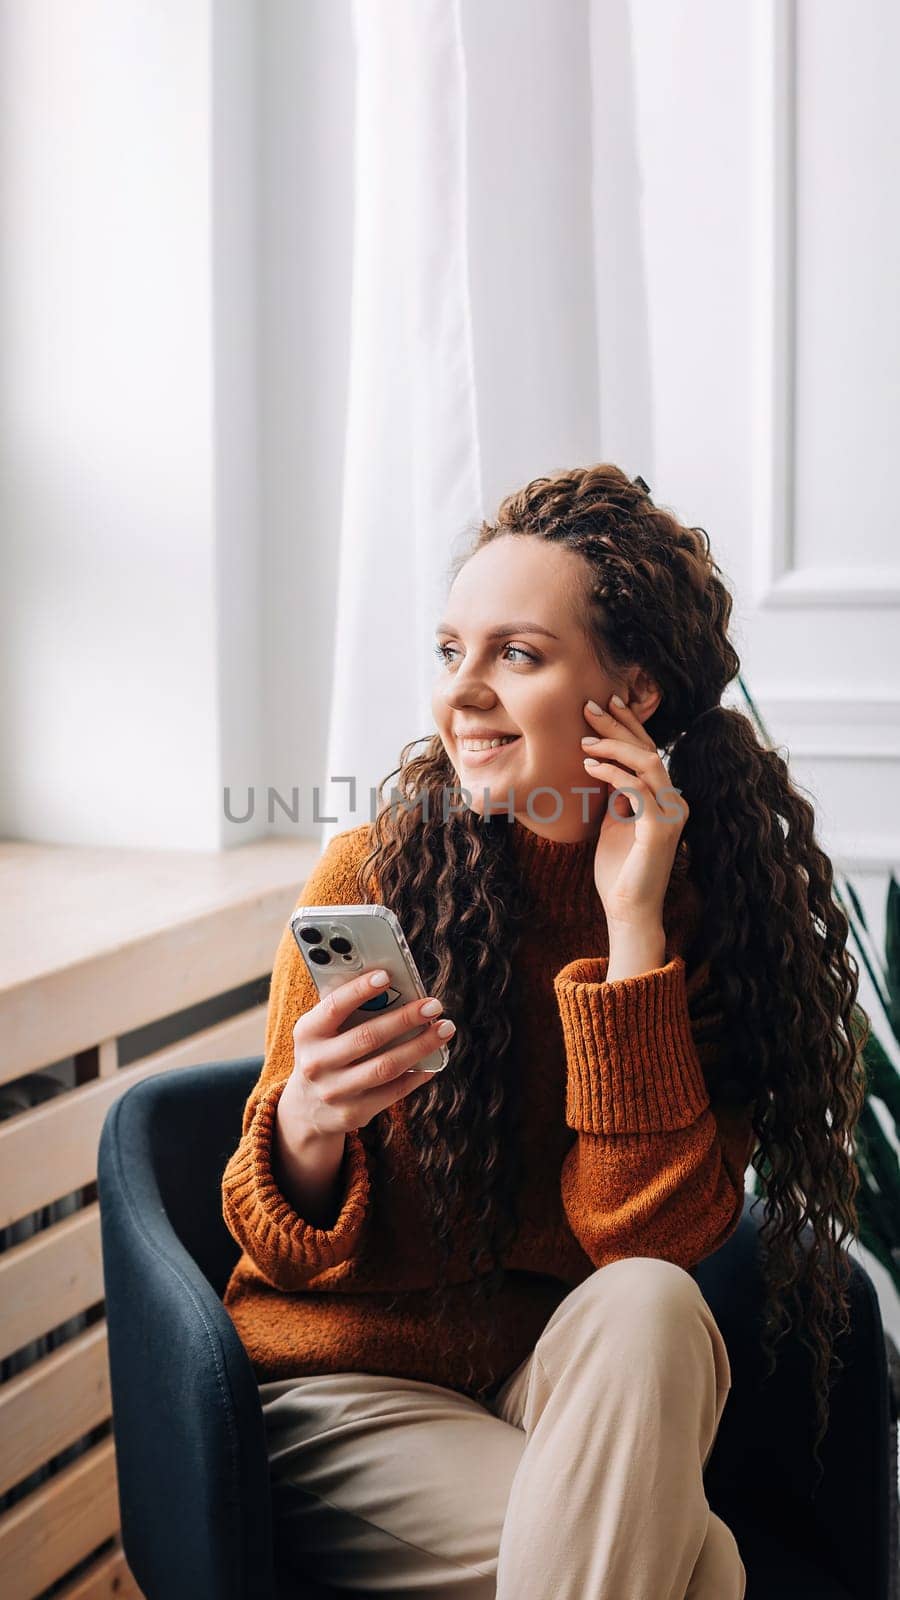 Young woman enjoying smartphone apps and texting while sitting on a chair. Mobile phone user: woman checking apps, messaging, and shopping from home. Relaxed woman browsing modern apps.